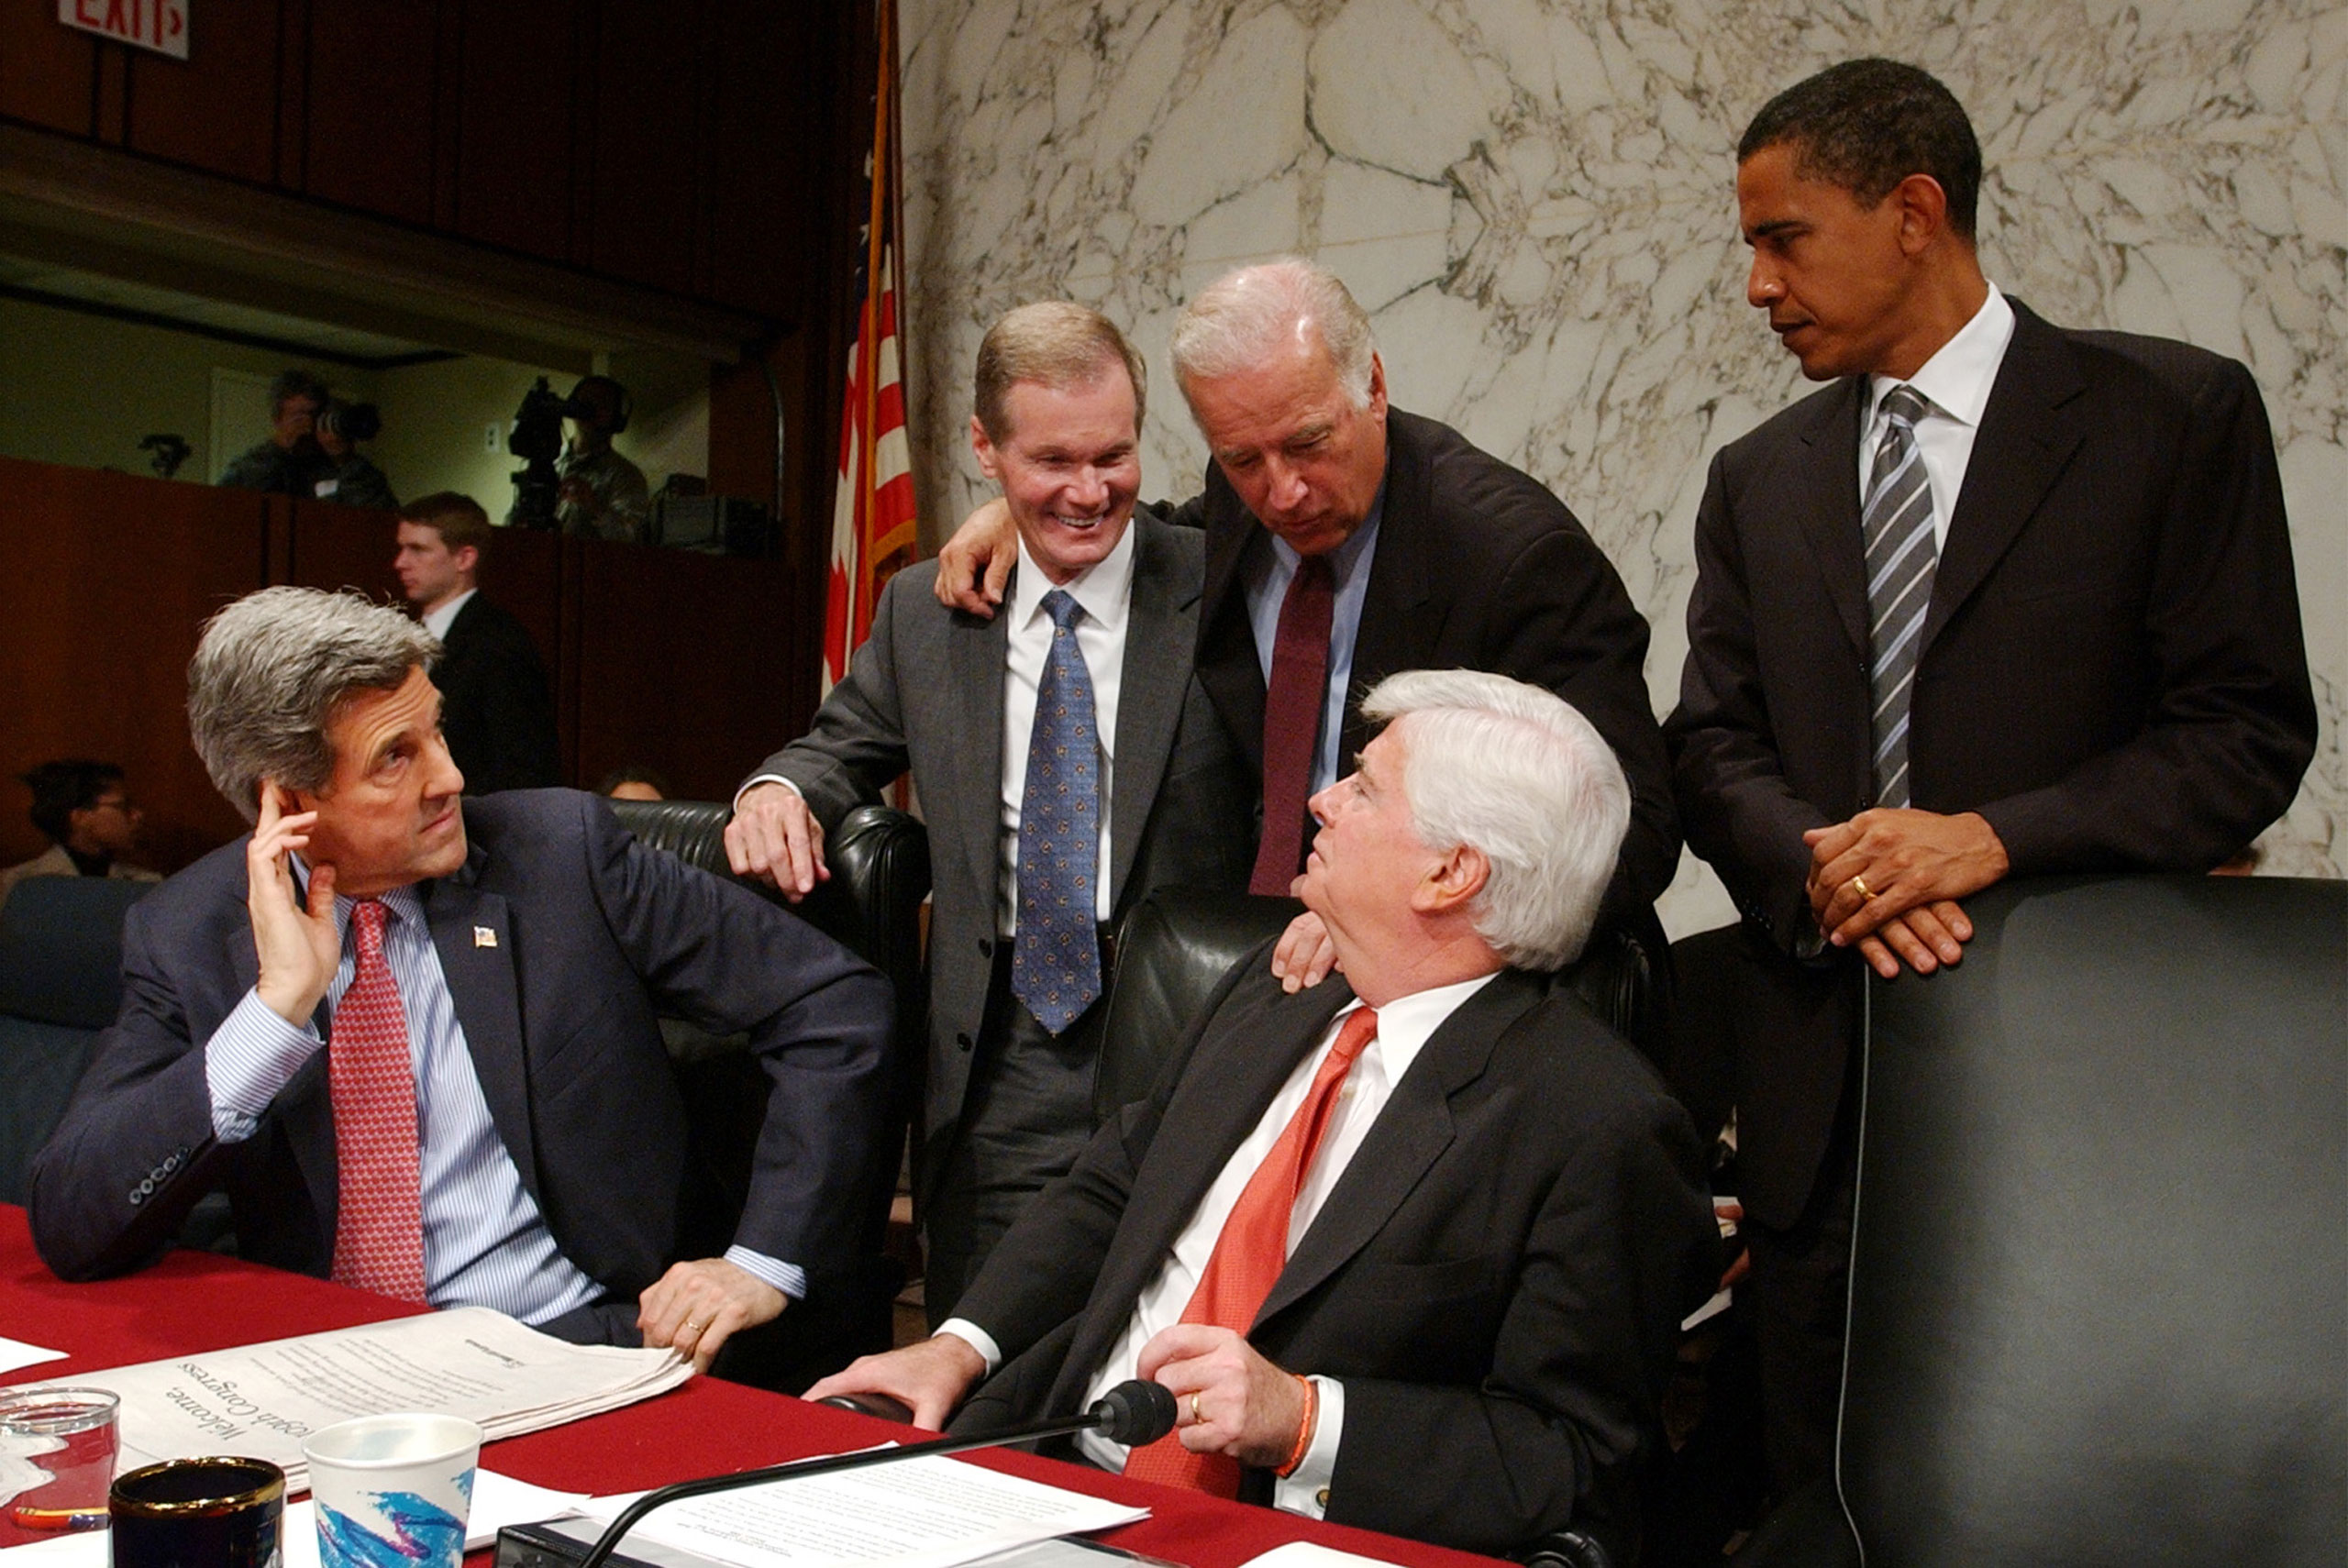 Democratic members of the Senate Foreign Relations Committee gather on Jan. 19, 2005, in Capitol Hill, Washington, DC.